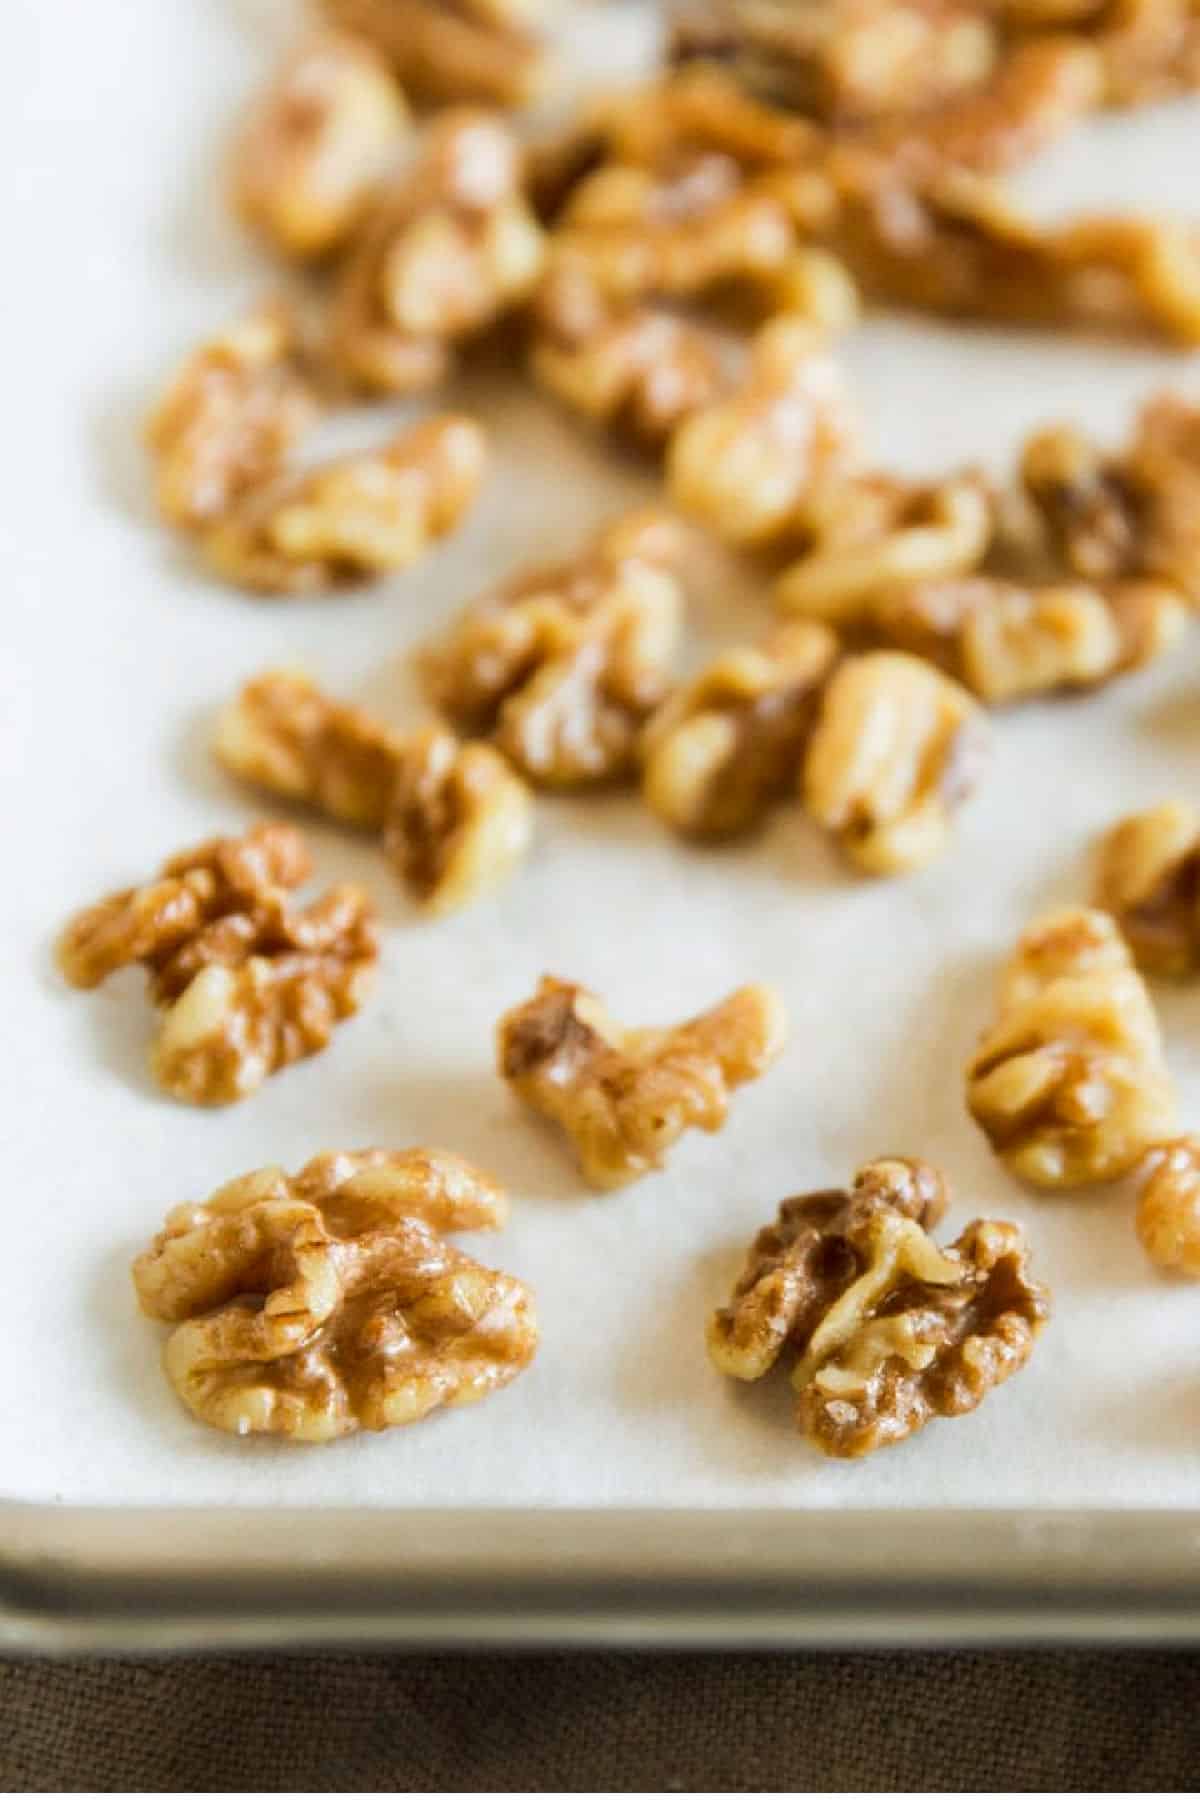 Toasted walnuts on a baking sheet.